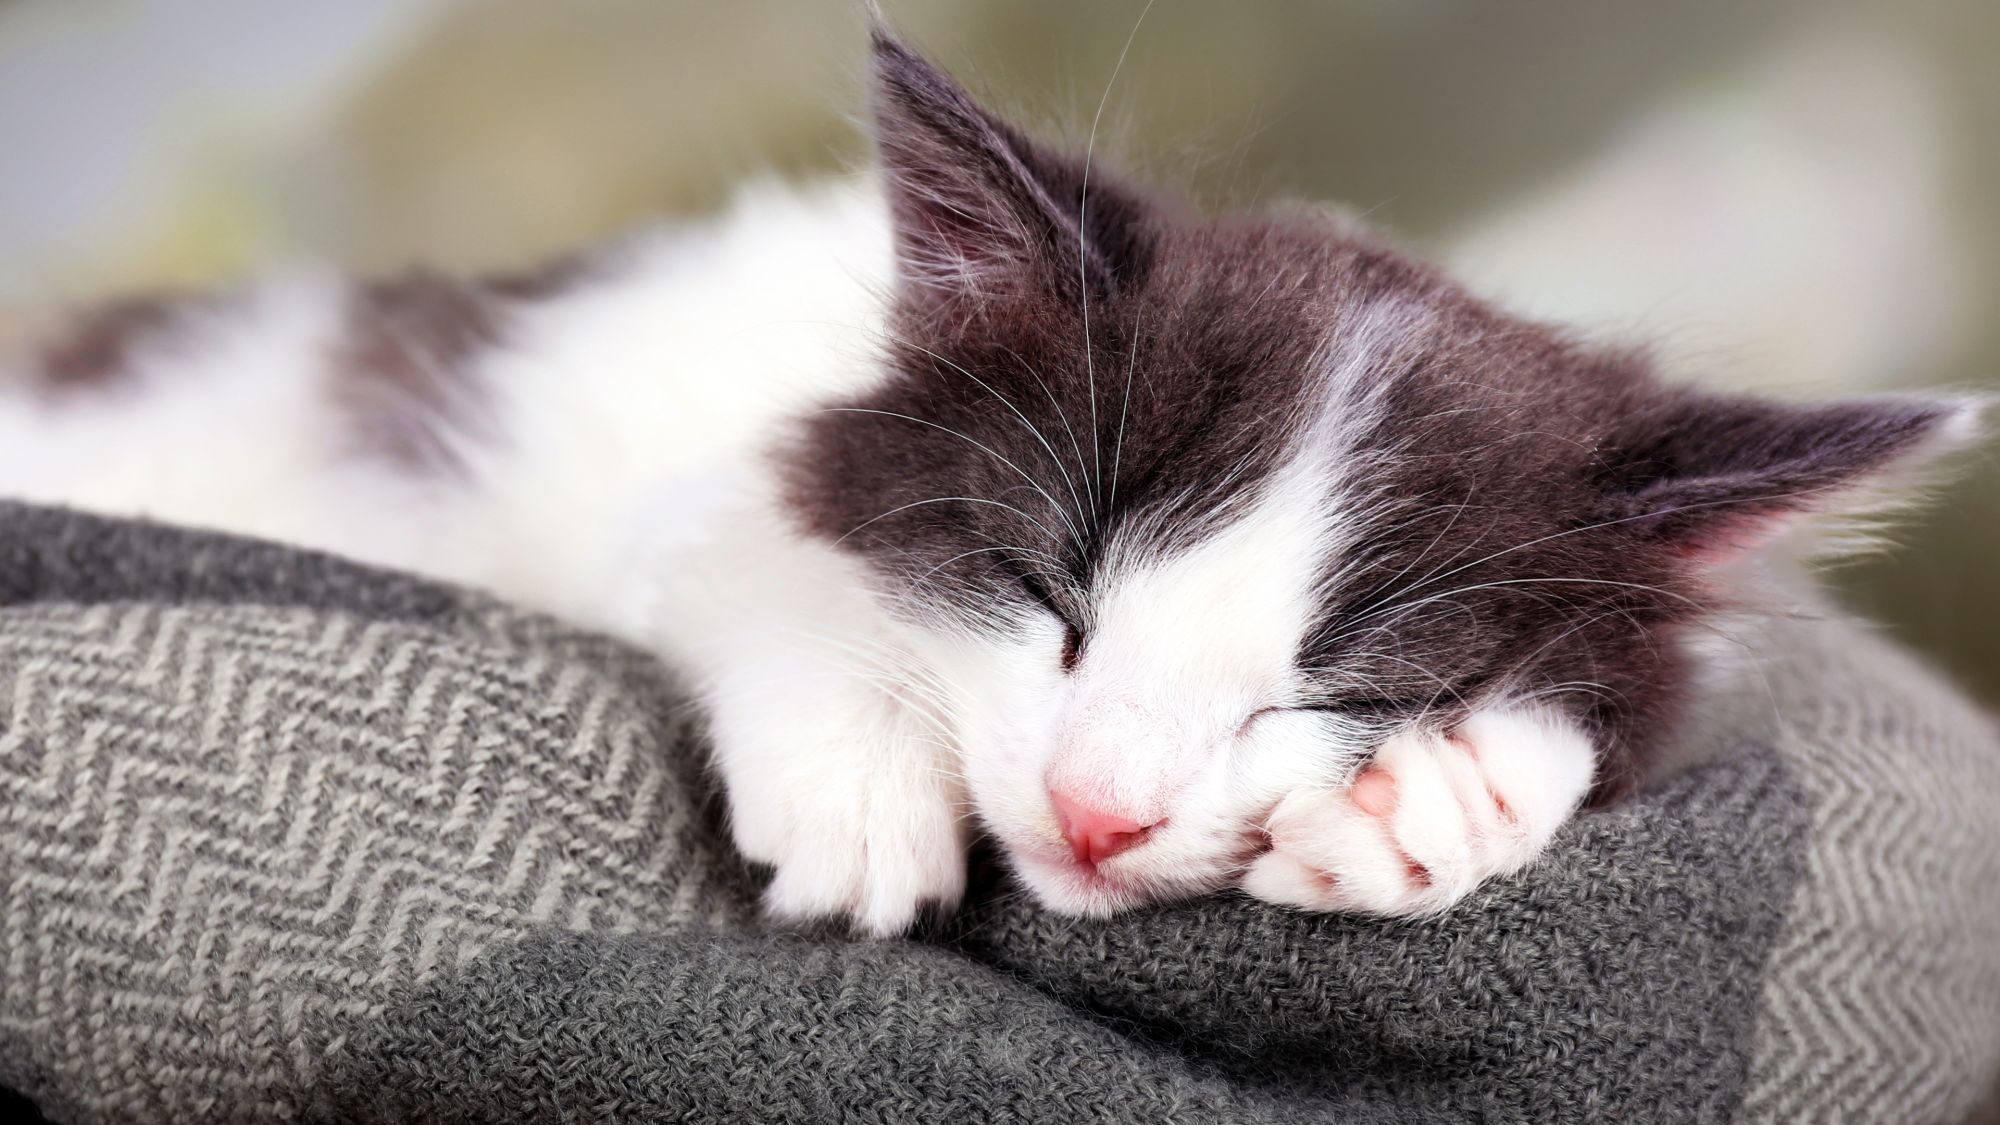 Kitten sleeping on a grey and white blanket